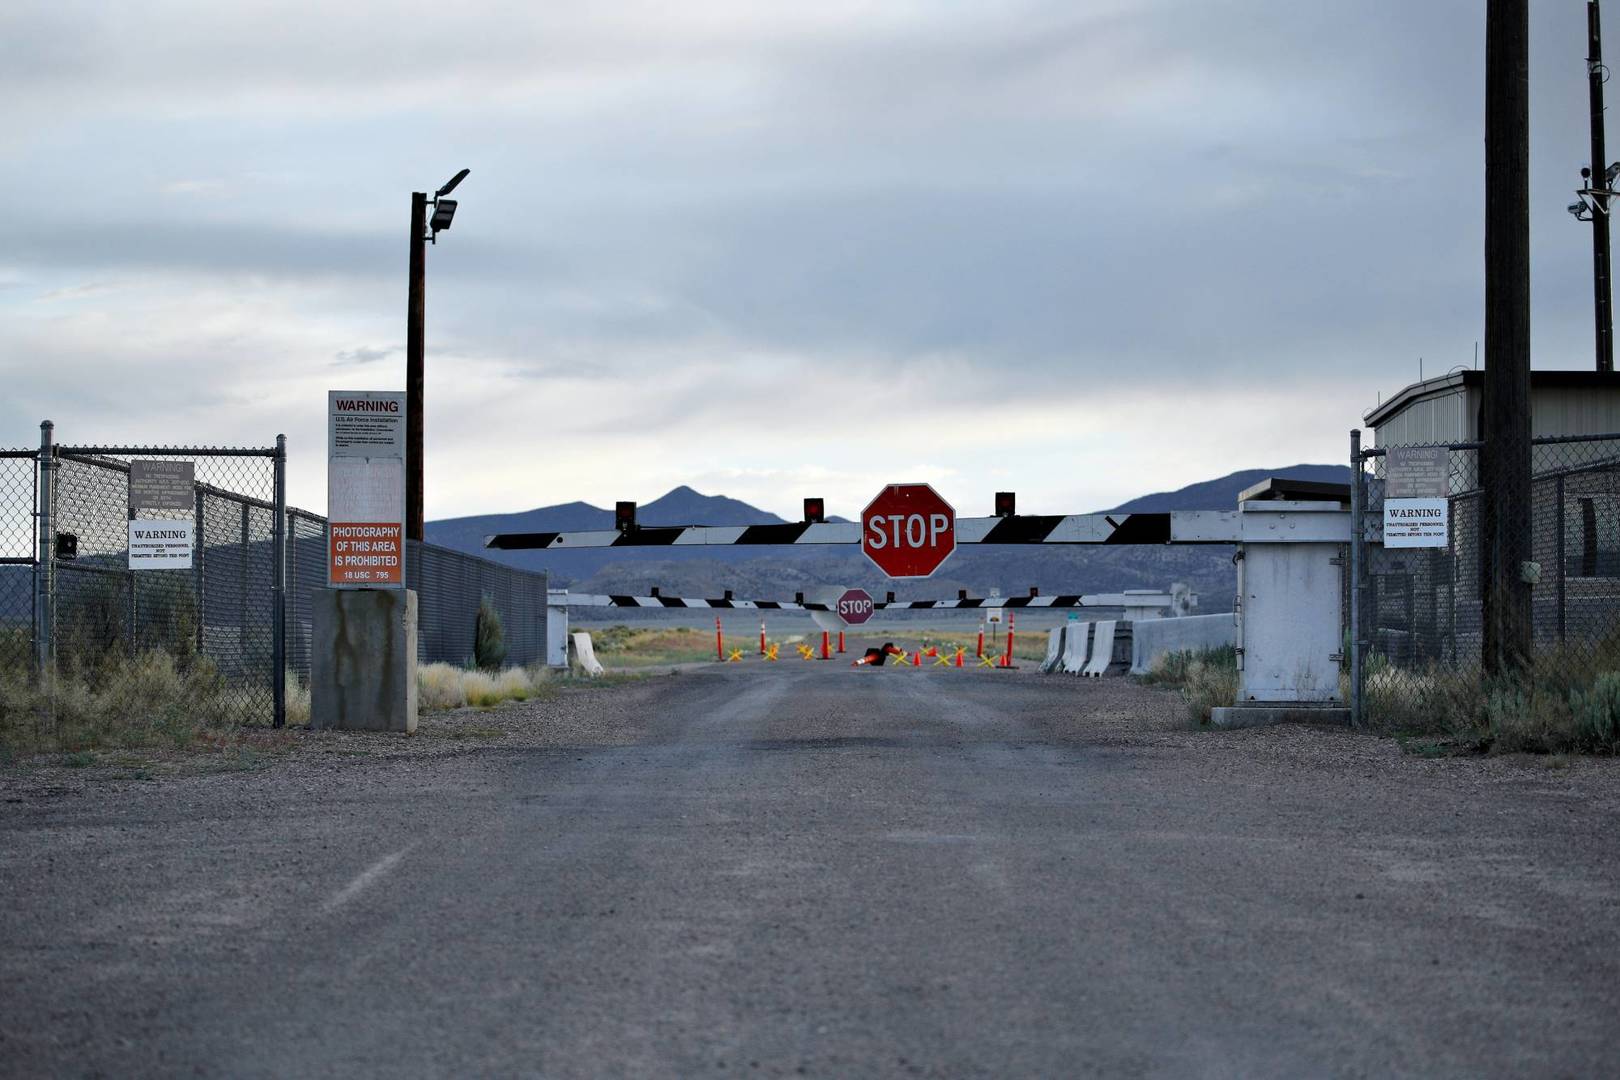 FILE - In this July 22, 2019 file photo, signs warn about trespassing at an entrance to the Nevada Test and Training Range near Area 51 outside of Rachel, Nev. Officials in Nevada's rural Lincoln County have drafted an emergency declaration and are planning with state officials to handle possible crowds that might arrive for an event next month dubbed 